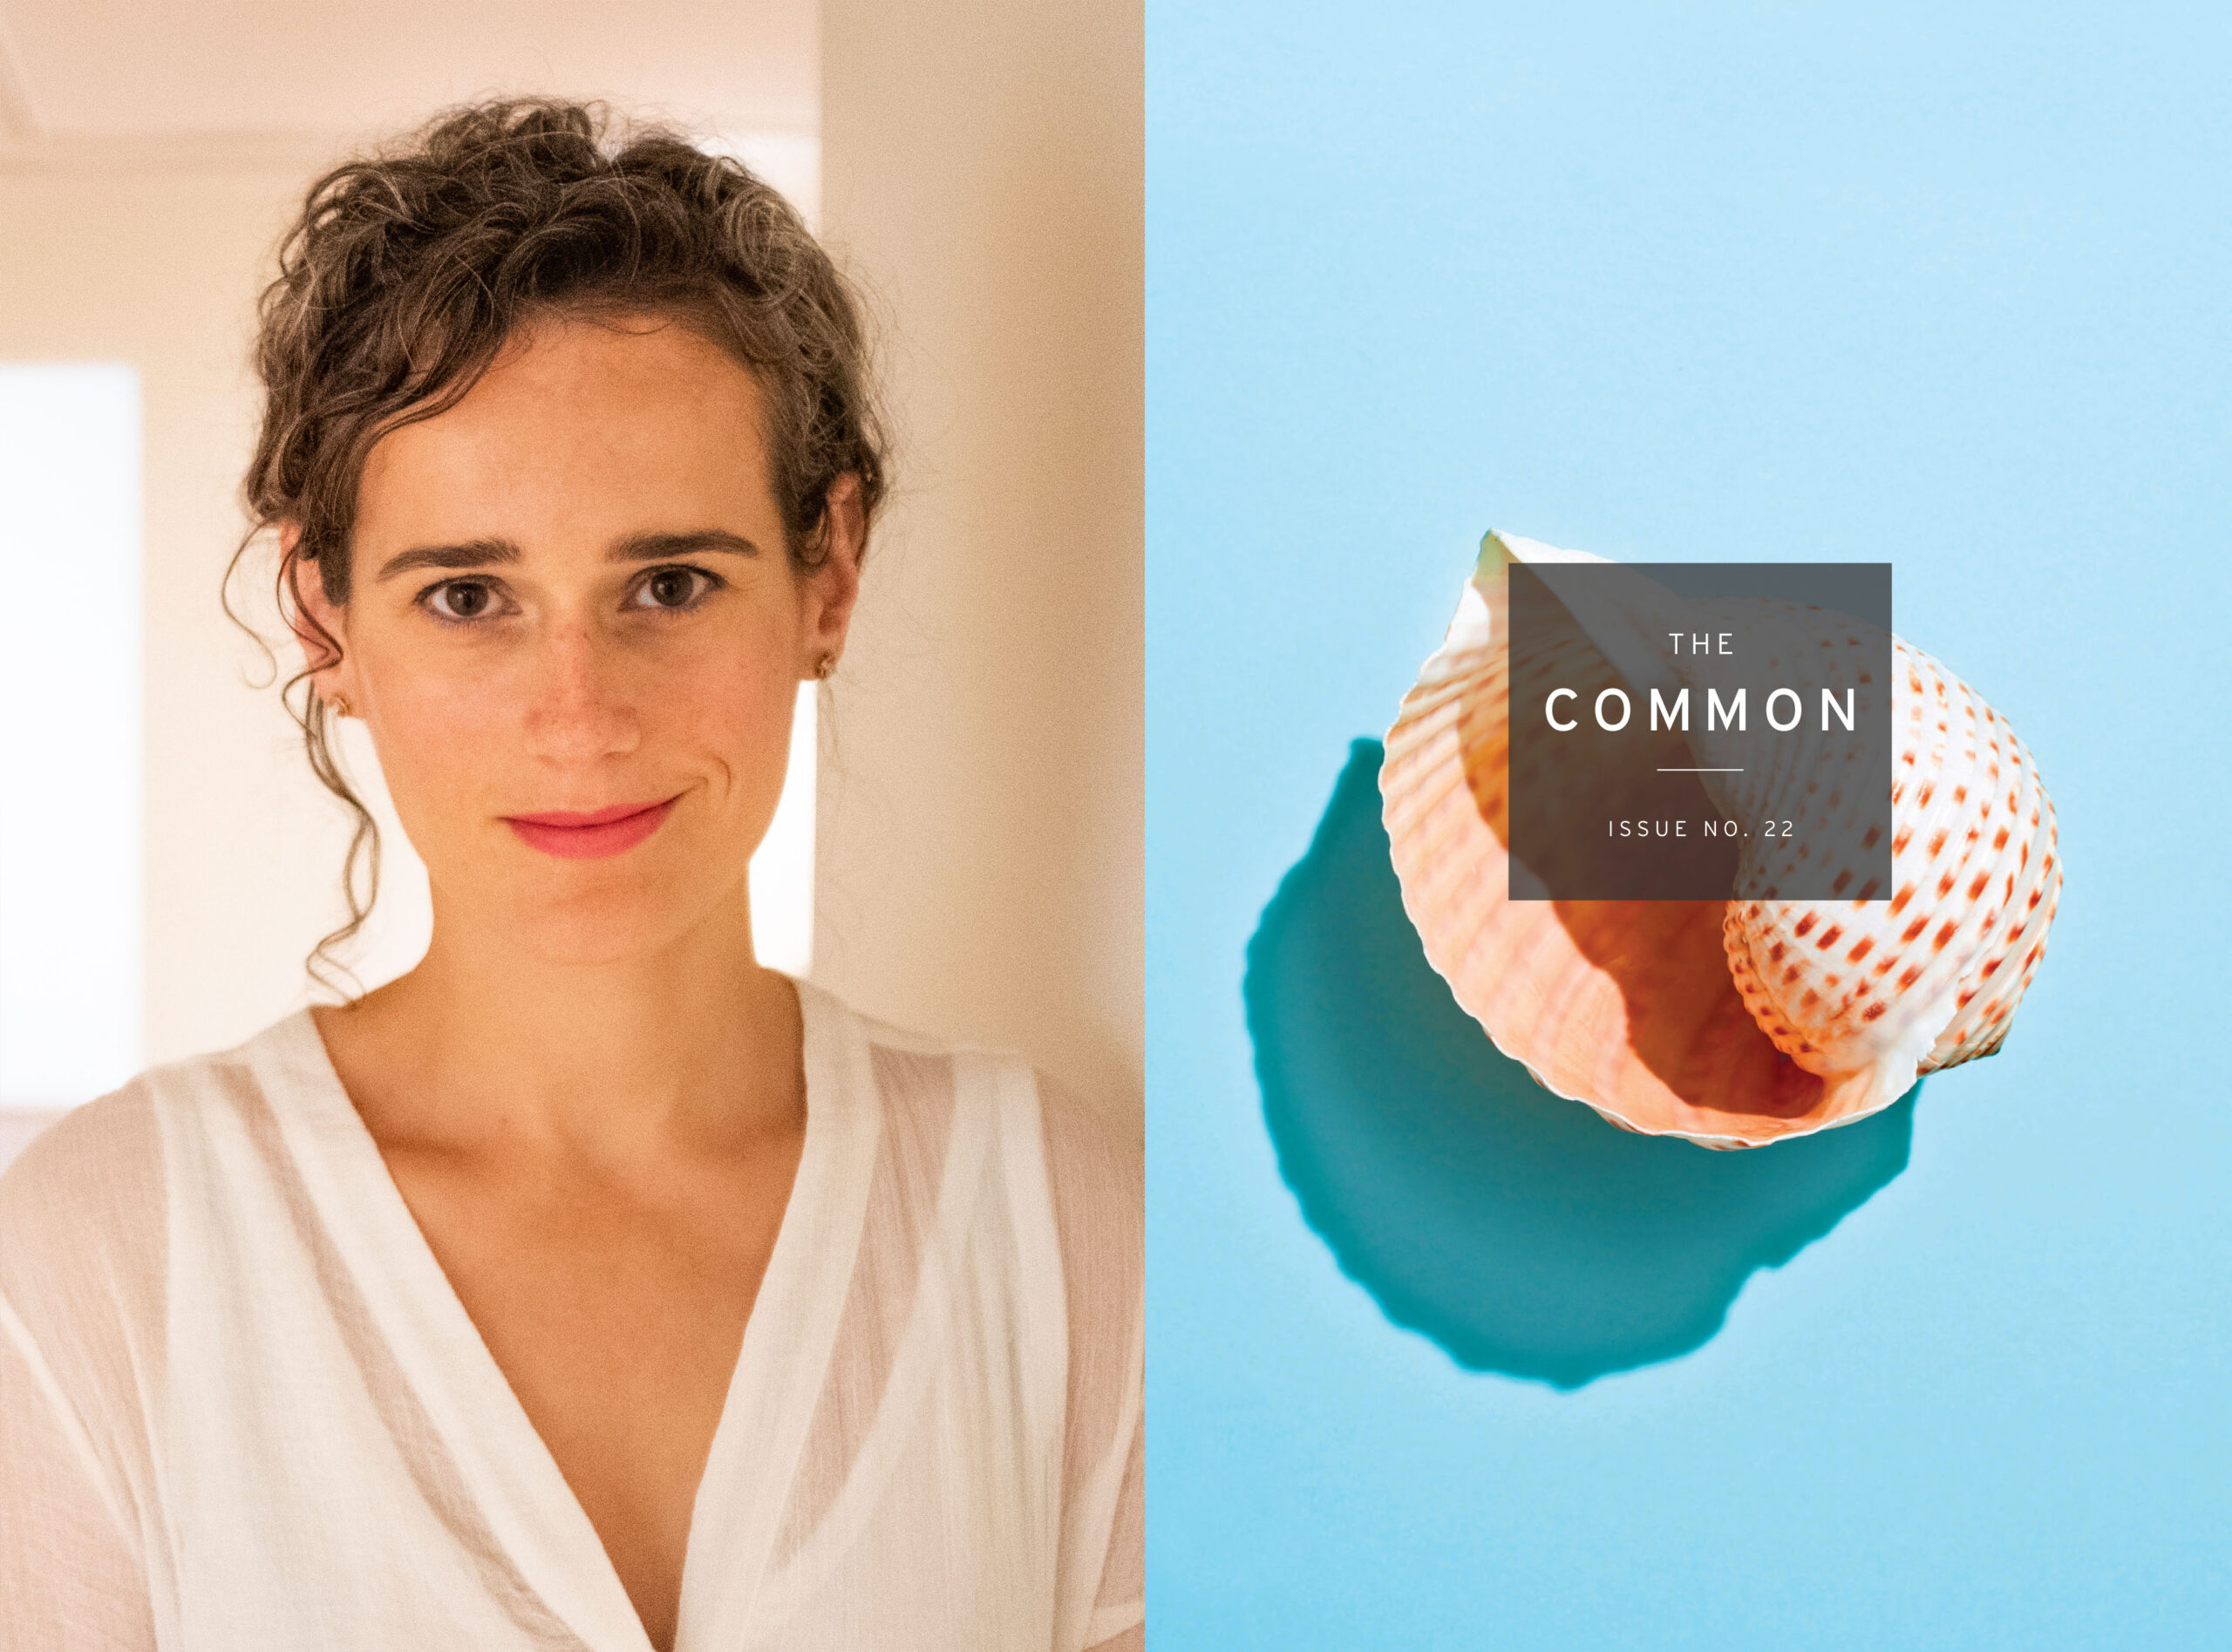 Image of Julia Cooke's headshot and The Common Issue 22 cover (pink seashell on light blue background)